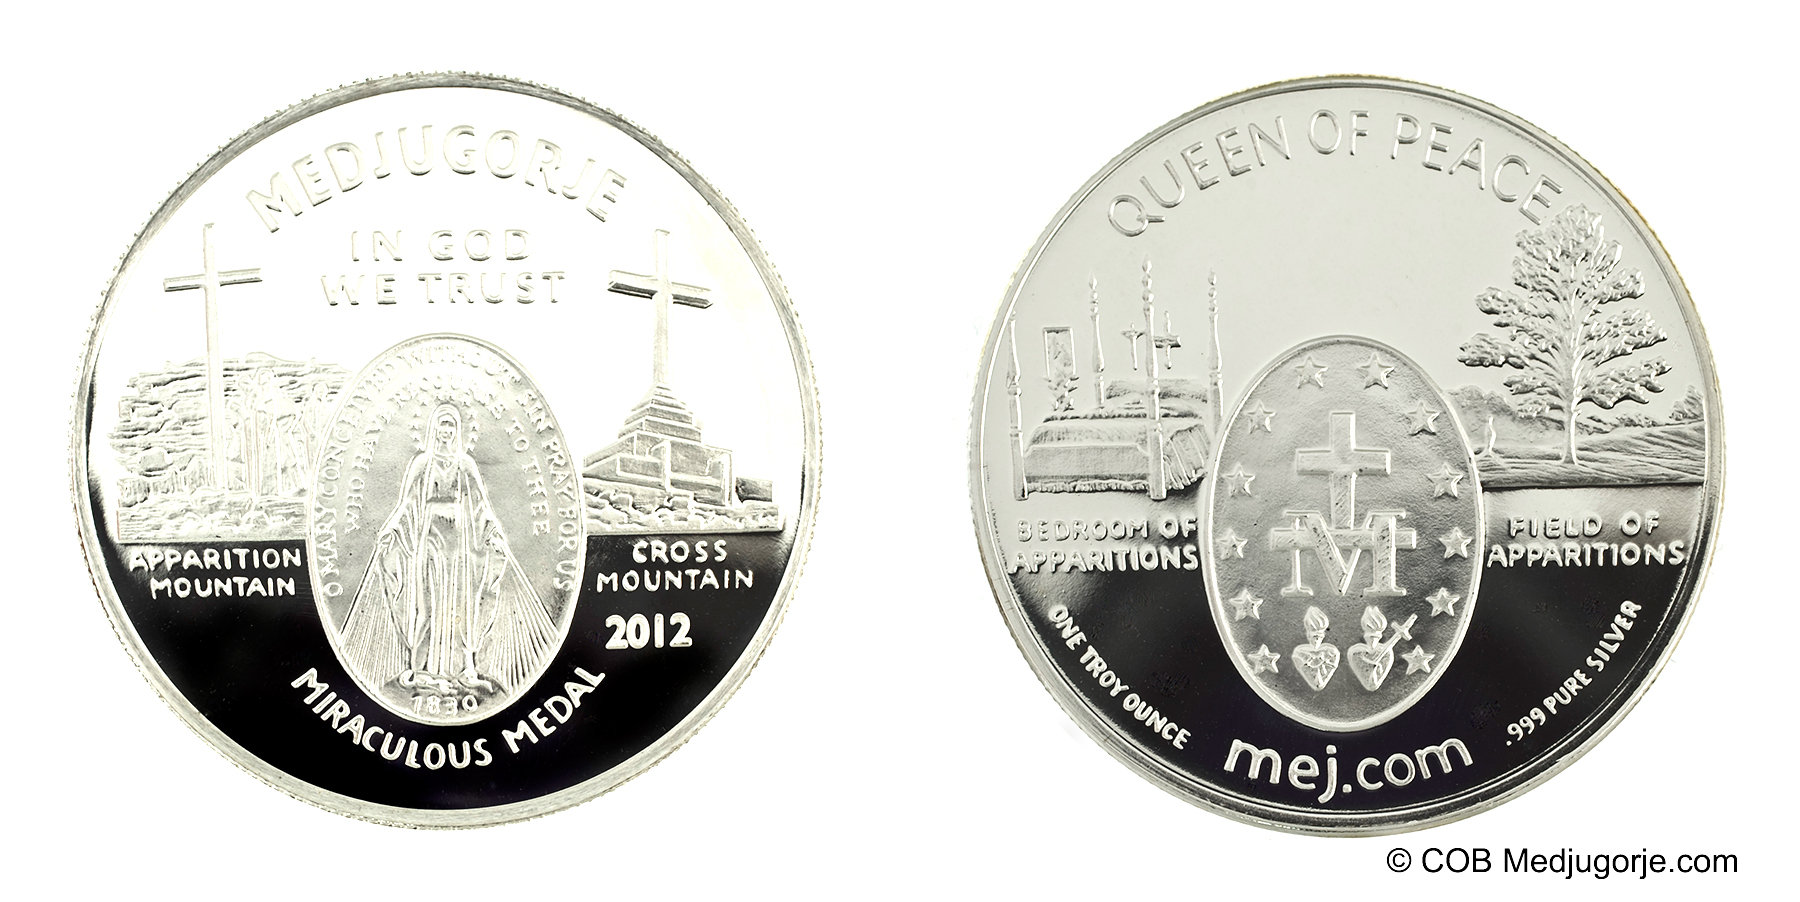 Miraculous Medal Medjugorje Silver Round